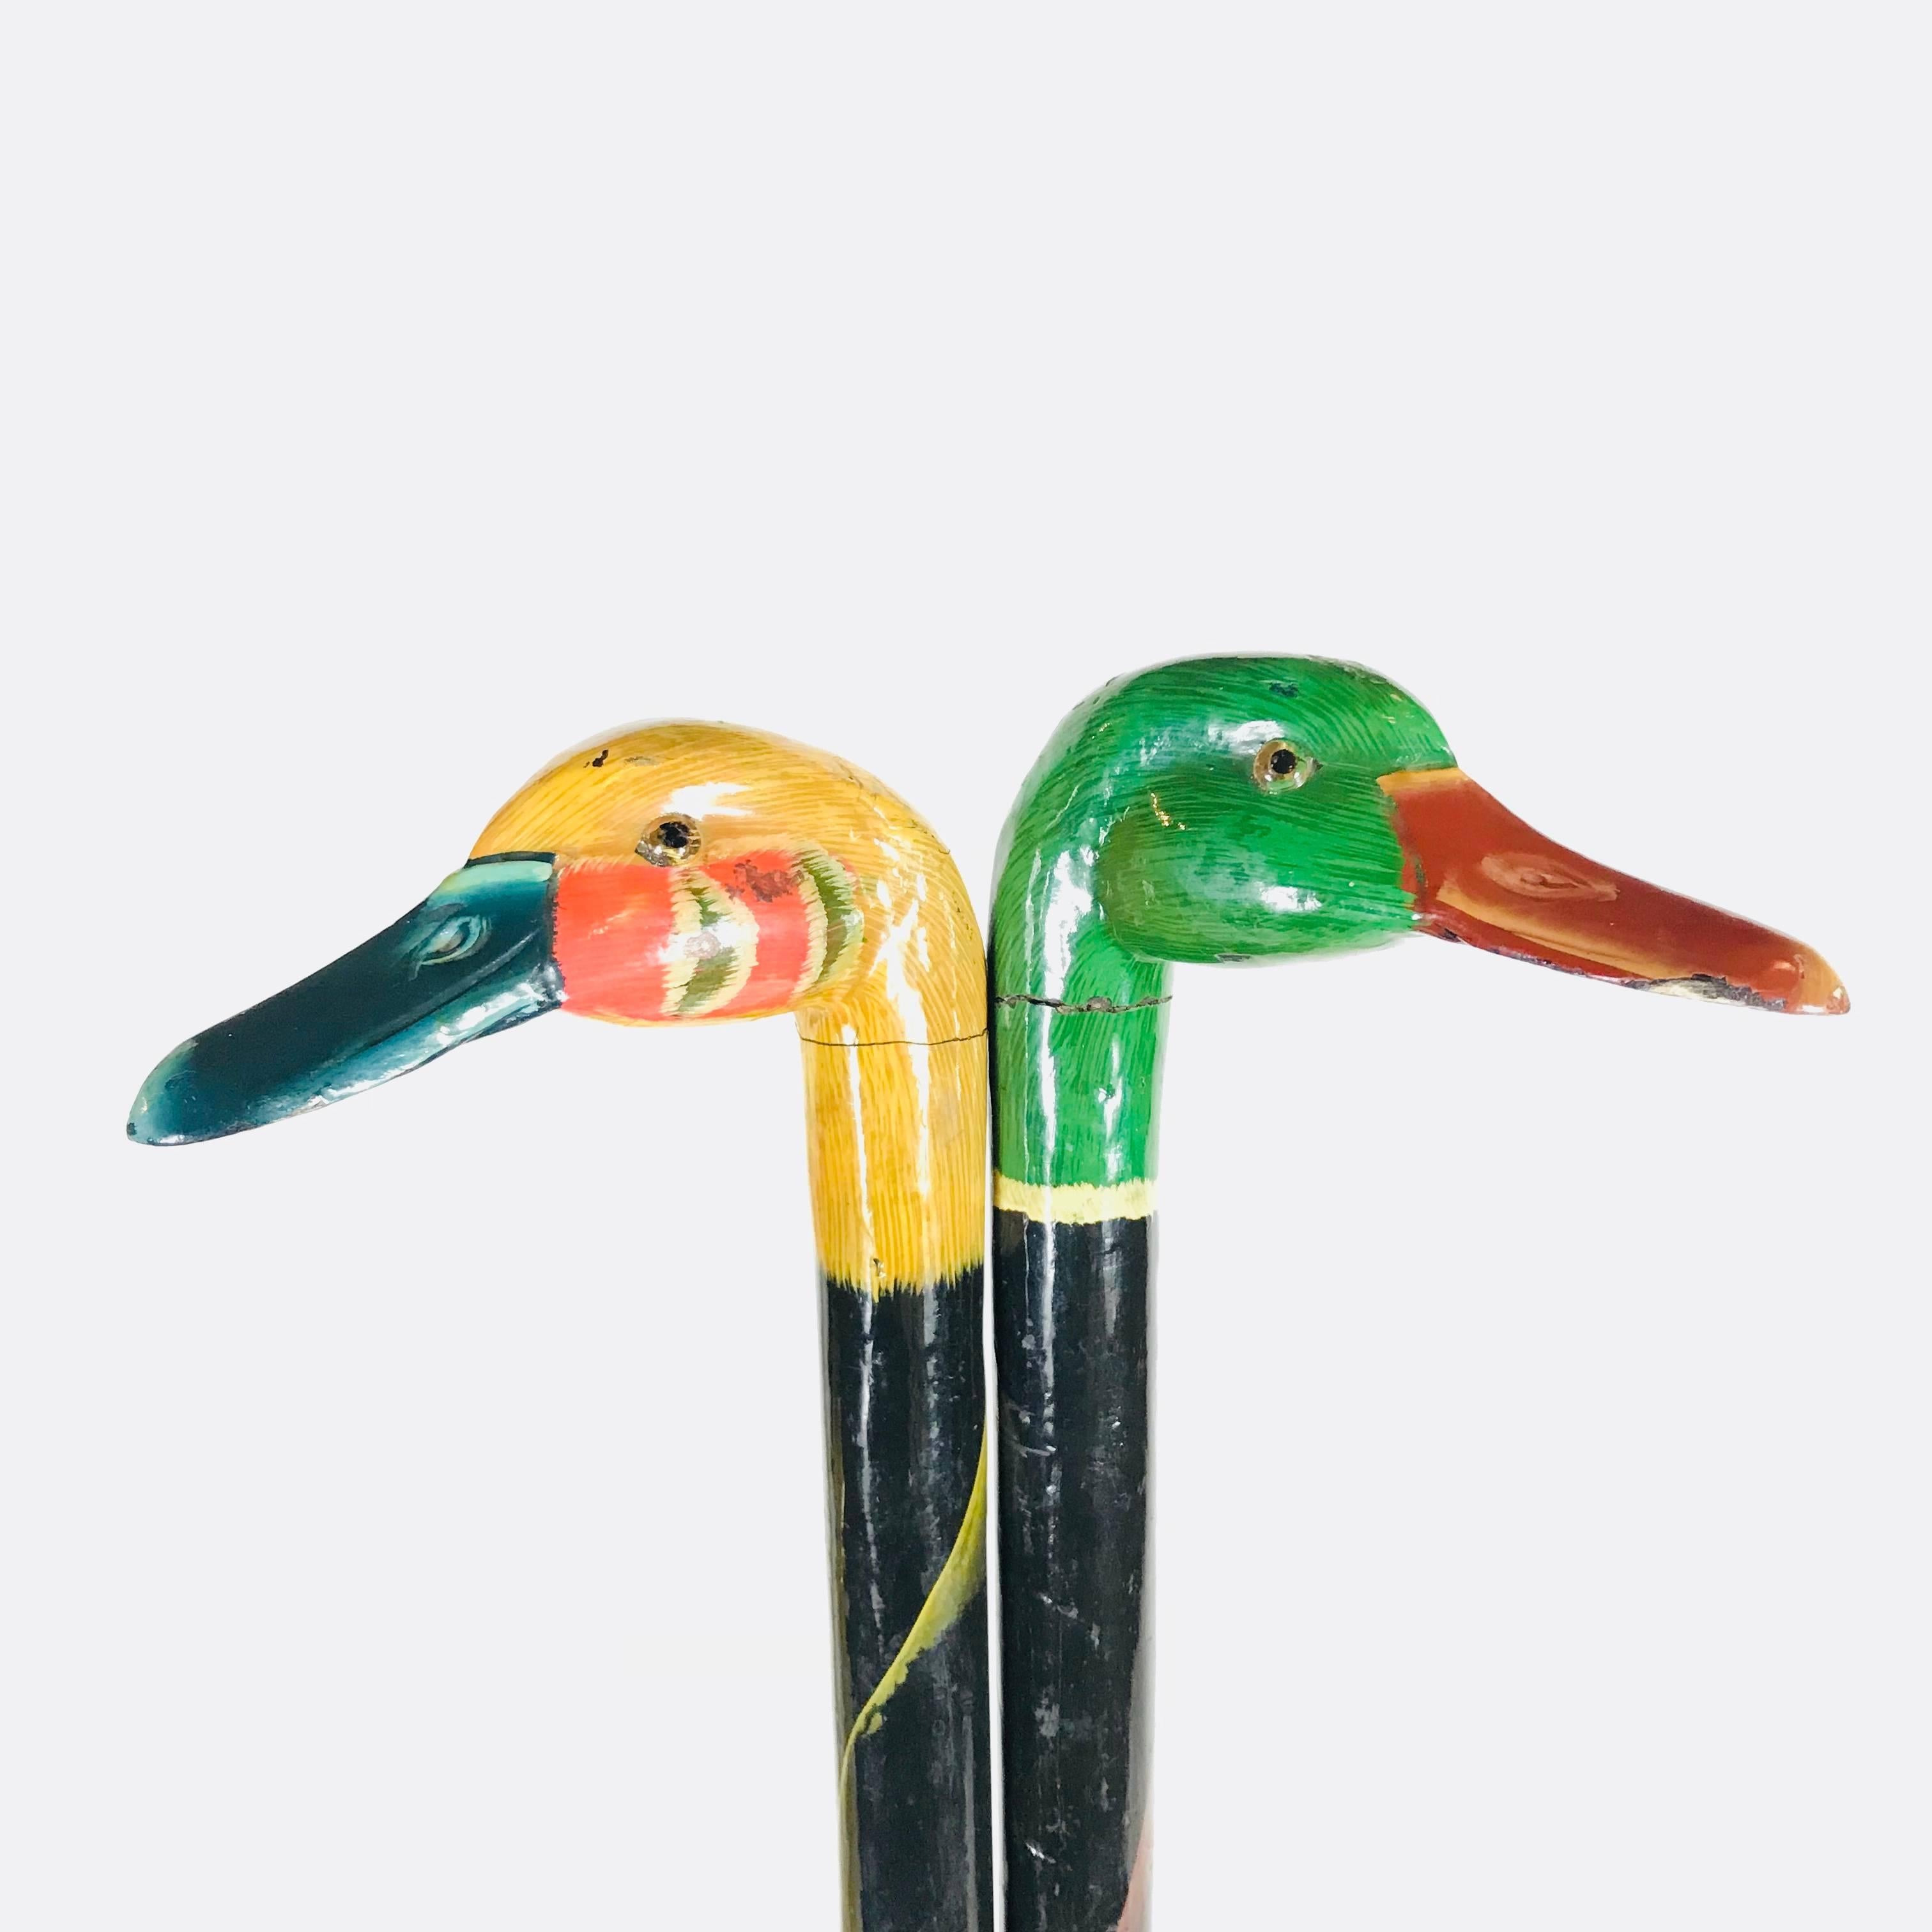 Pair of fine hand-painted duck head walking canes from 1950s England, the walking sticks are from a French collector. His collection included more than 500 canes. Very decorative items for a shop.

Measures: 
Stick length: 84 cm / 33 in.
Material: